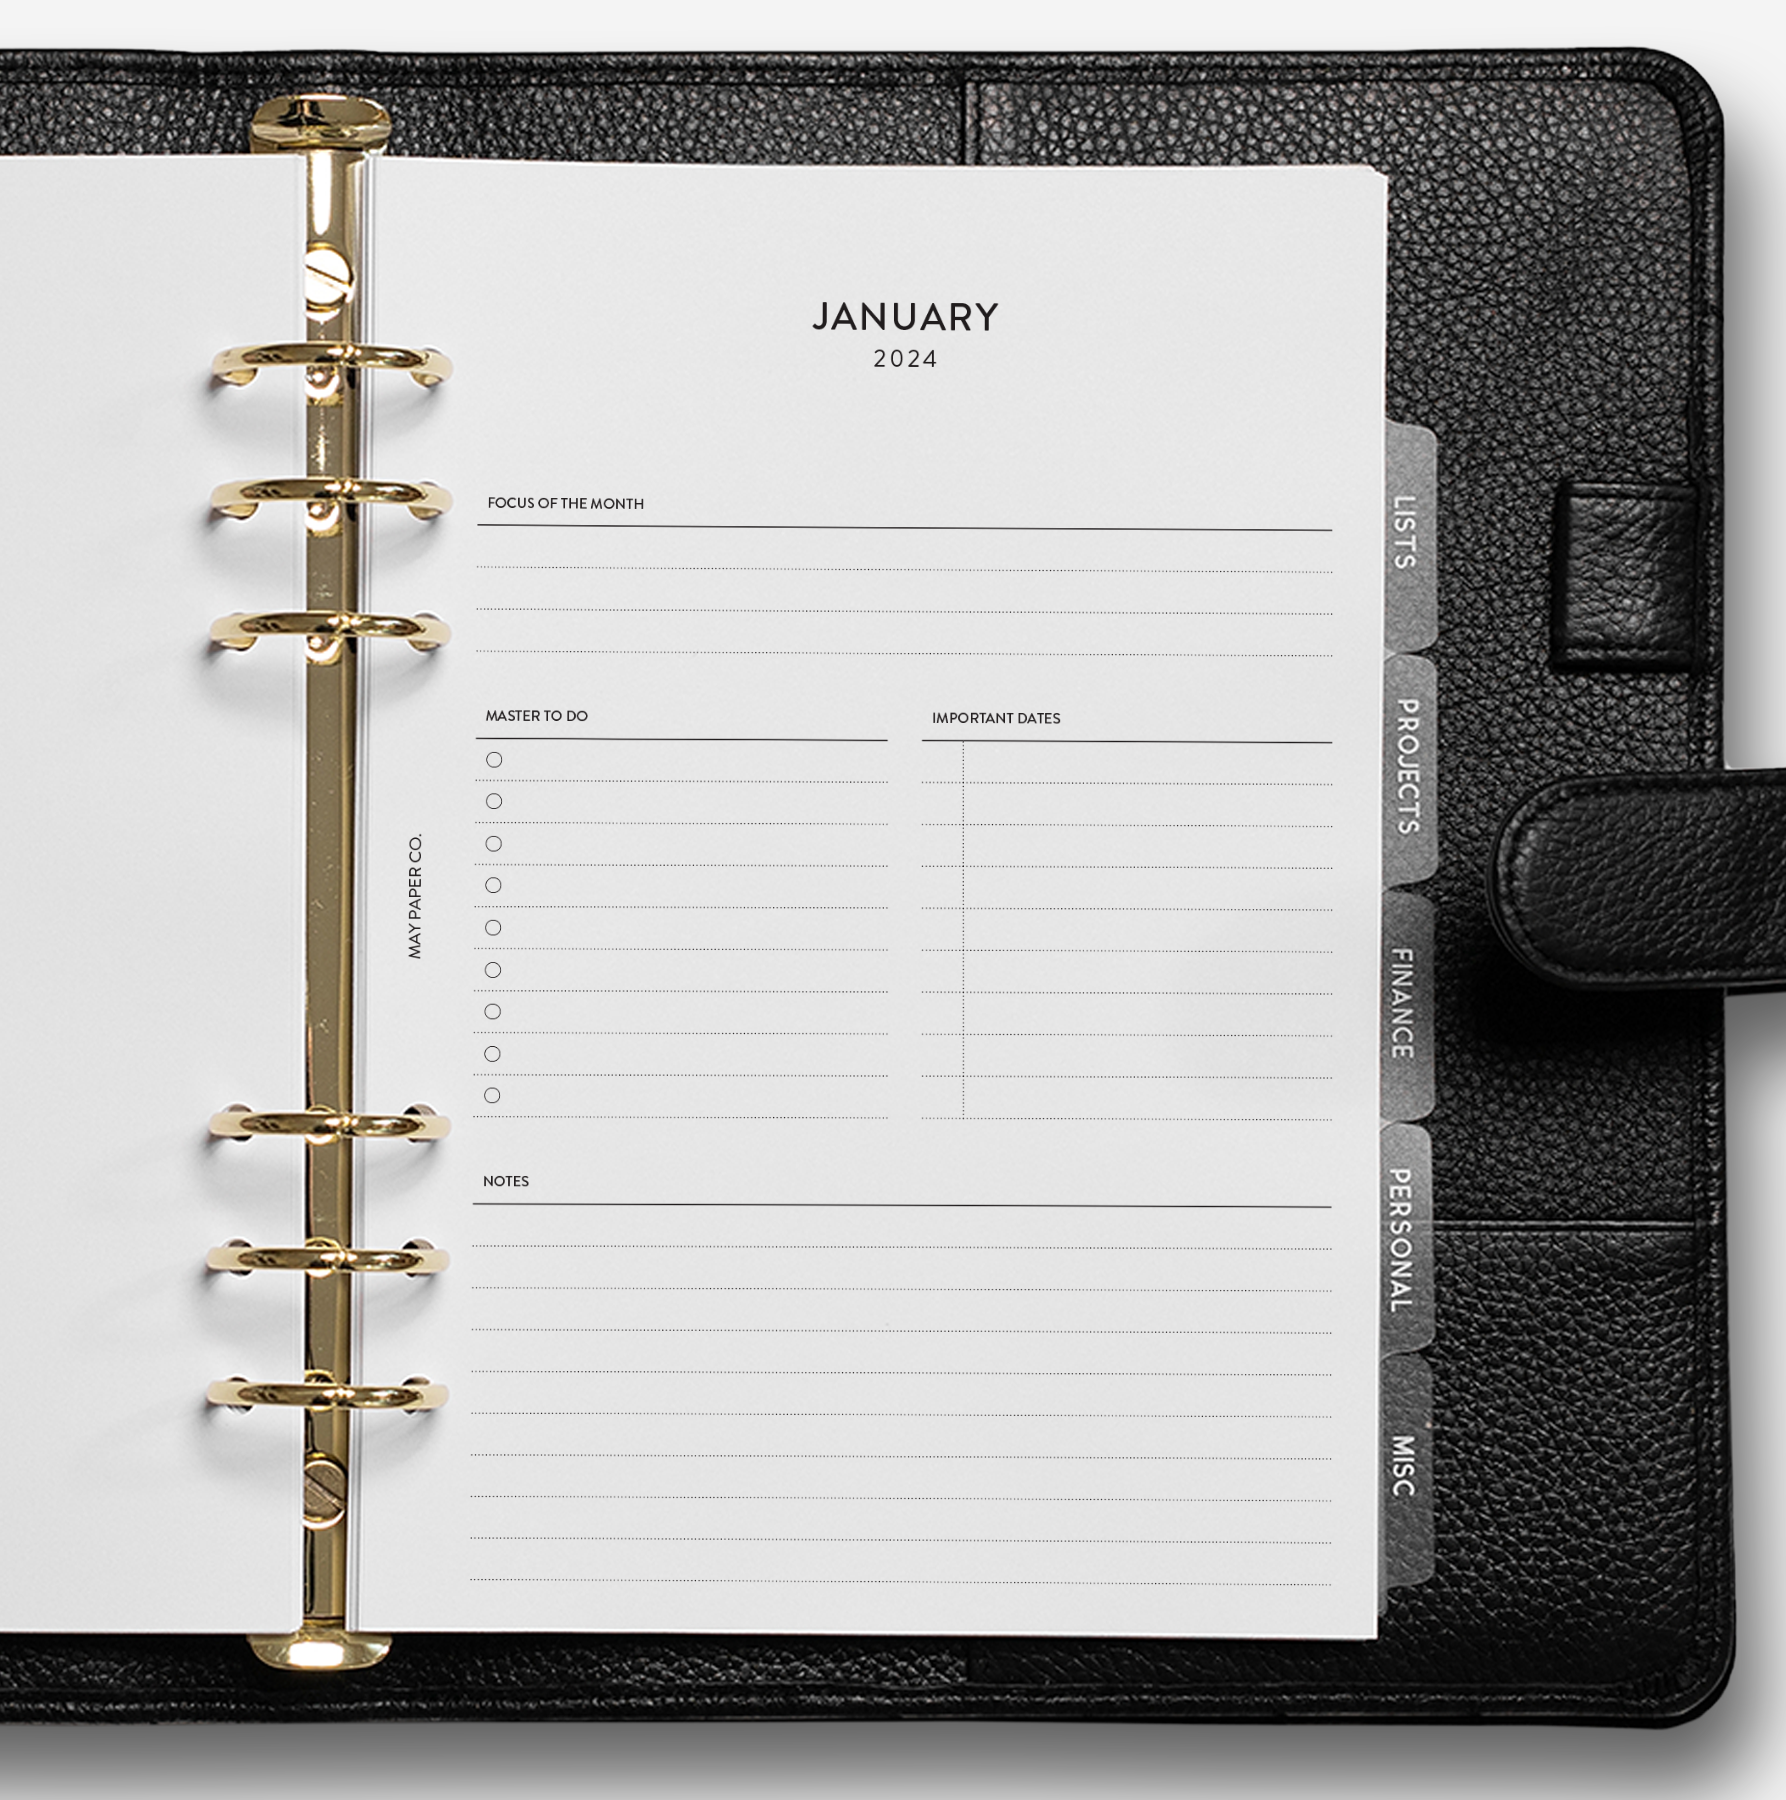 Handmade Luxury A6/A5 Personal-Size Checkered & Black Agenda Planner, 6-RING